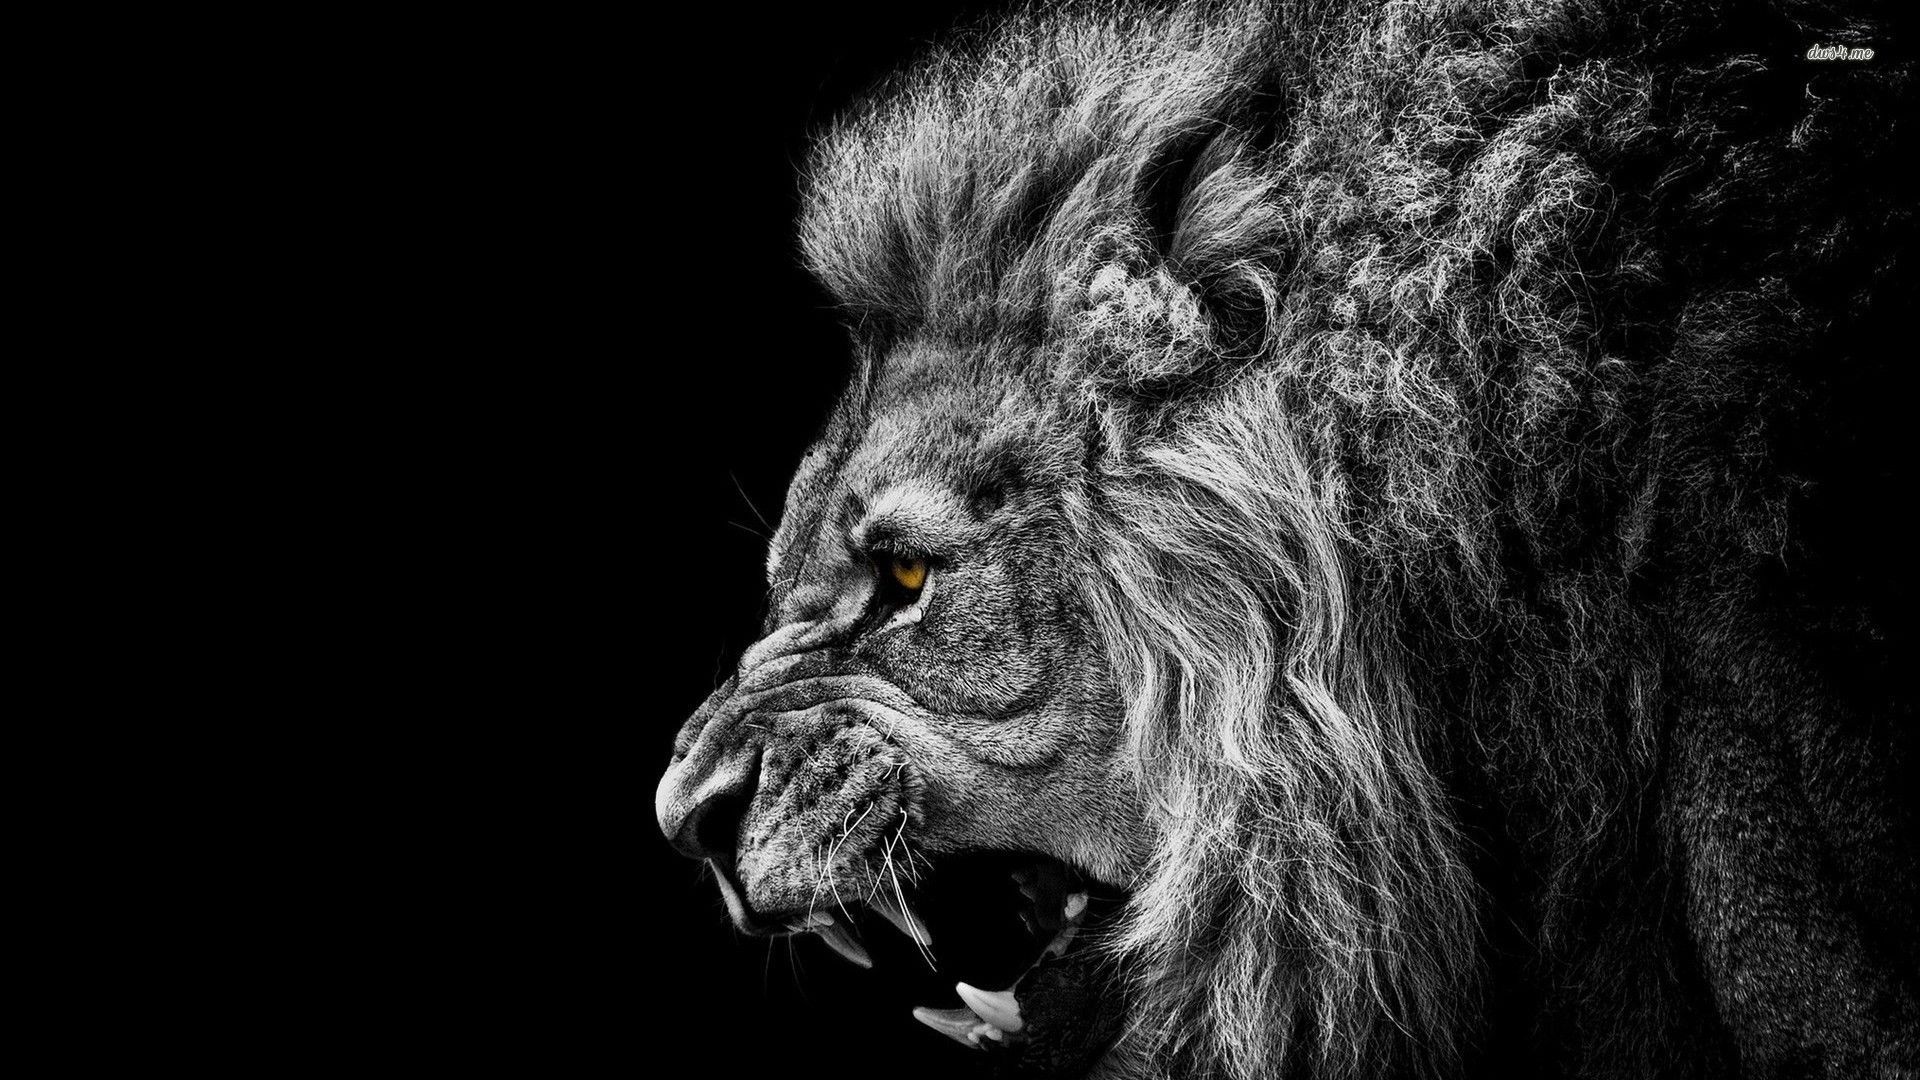 A lion in black and white wallpaper - Animals wallpapers - #18961 - Lion